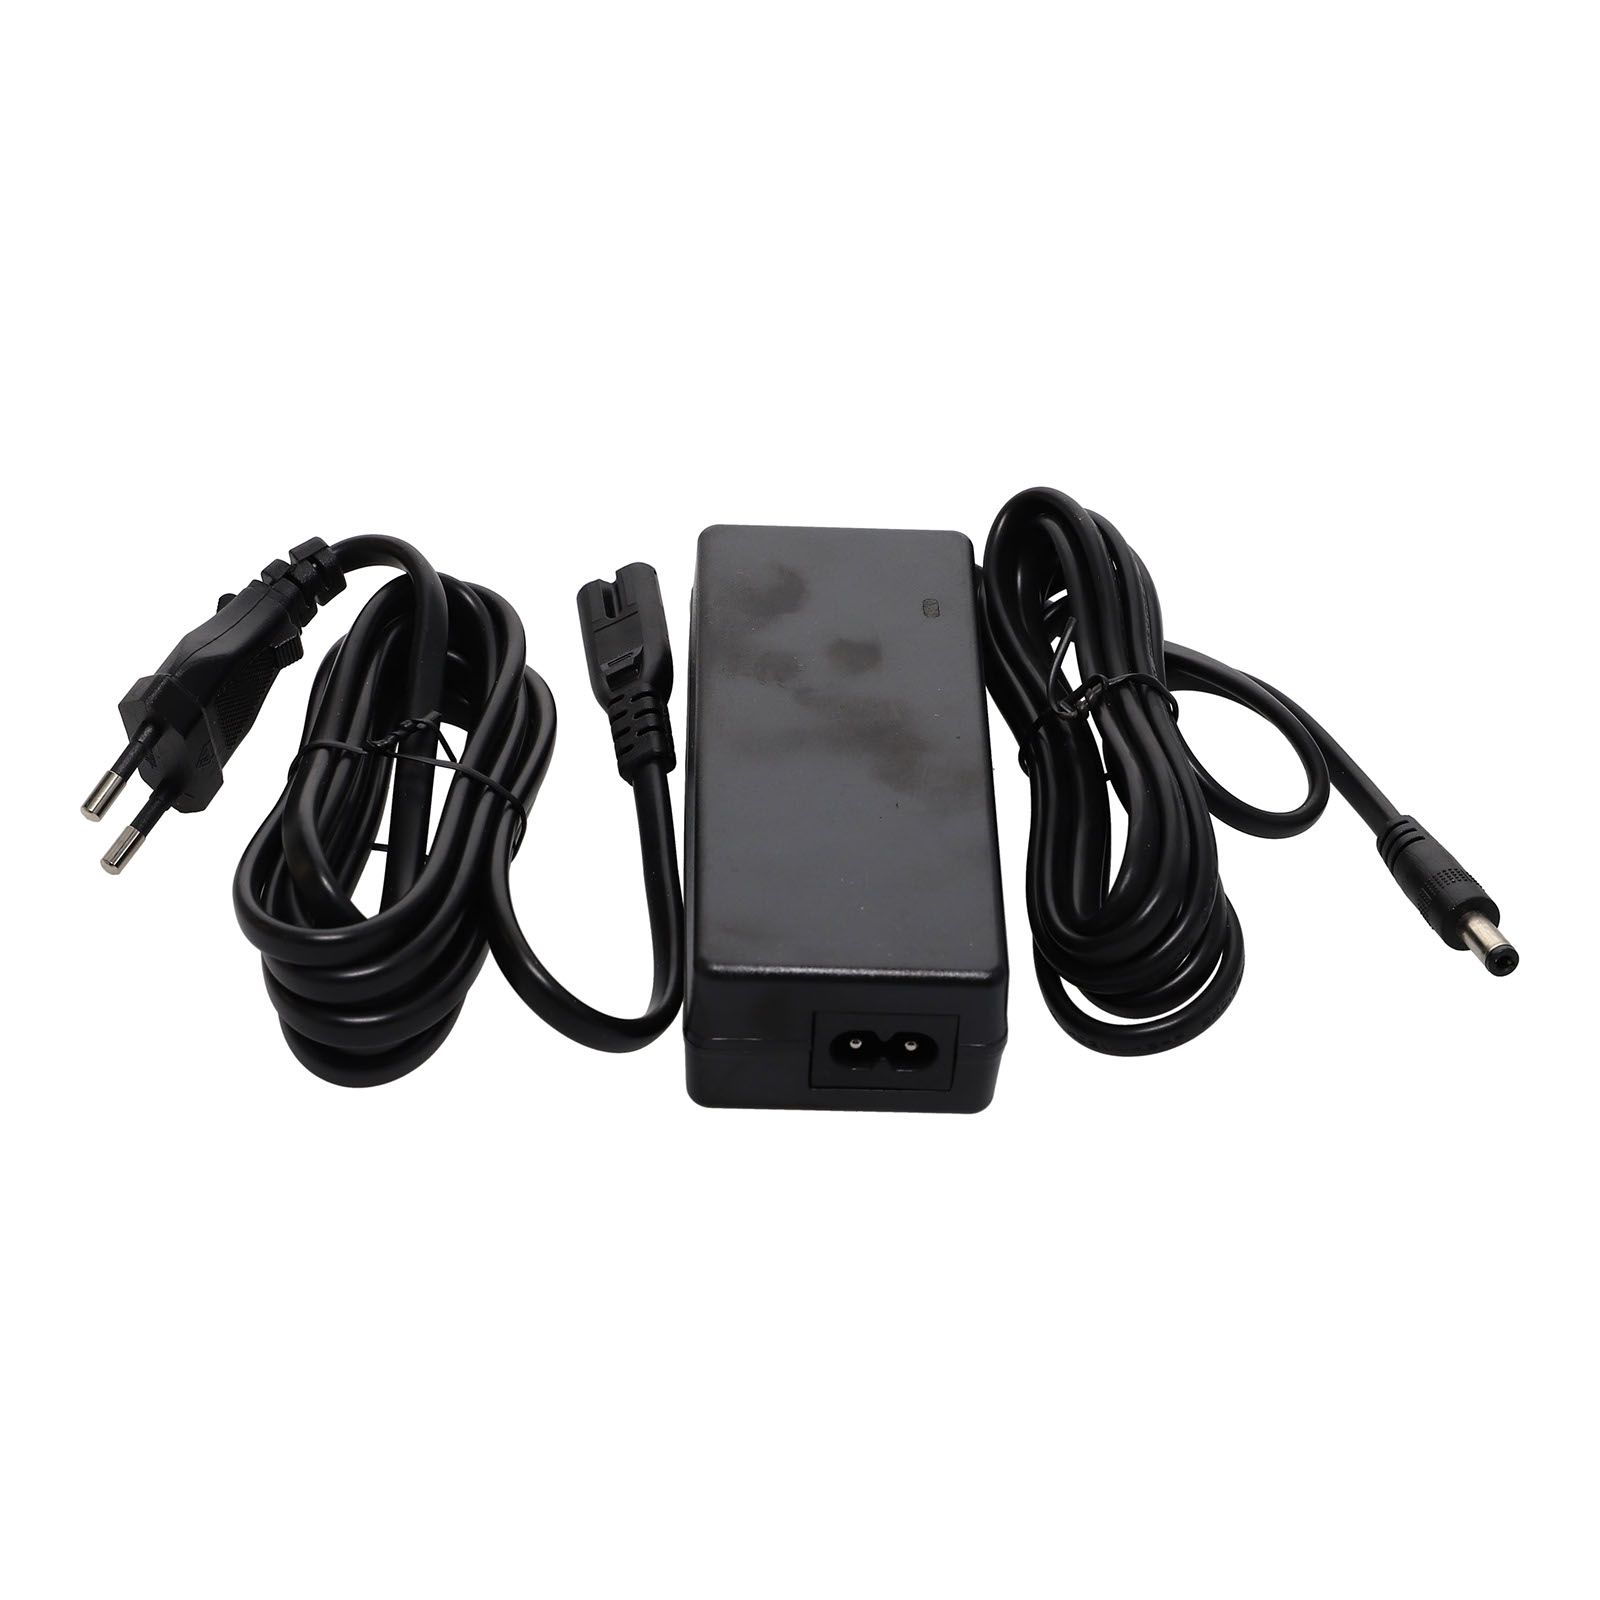 CHARGER FOR ULTRACAPACITOR JUMP STARTERS 产品照片